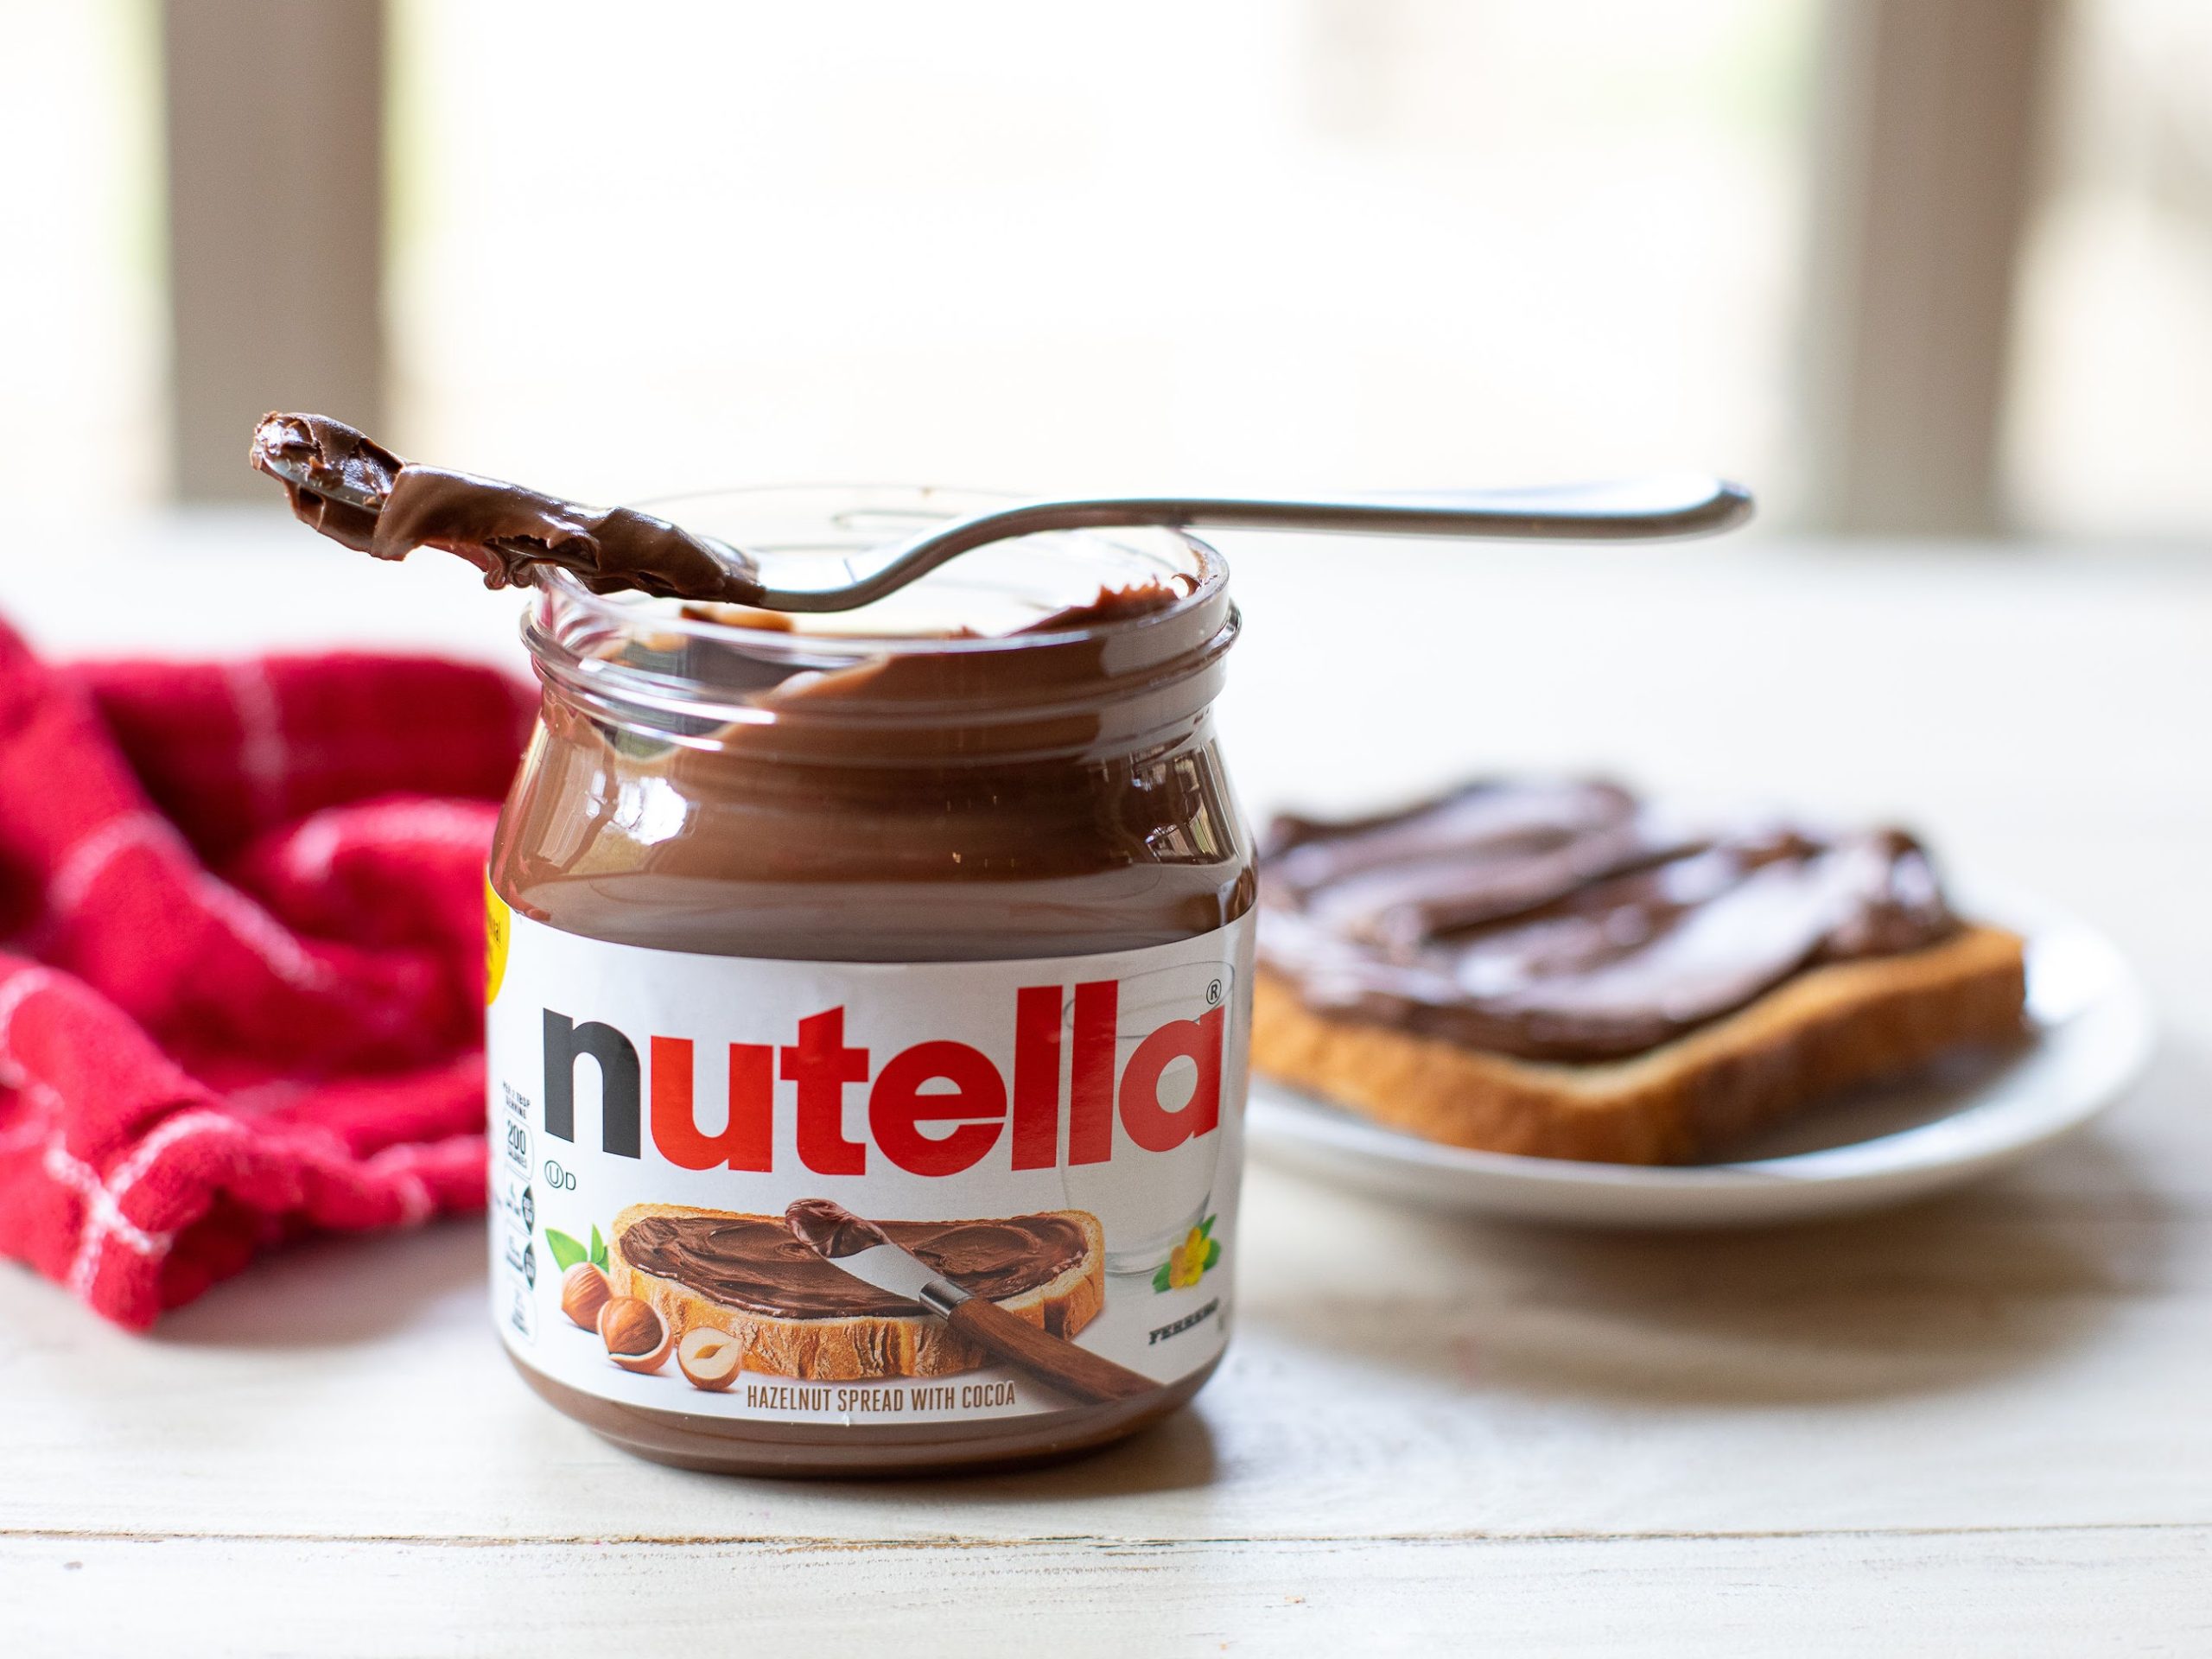 Grab Nutella For Just 30¢ At Publix